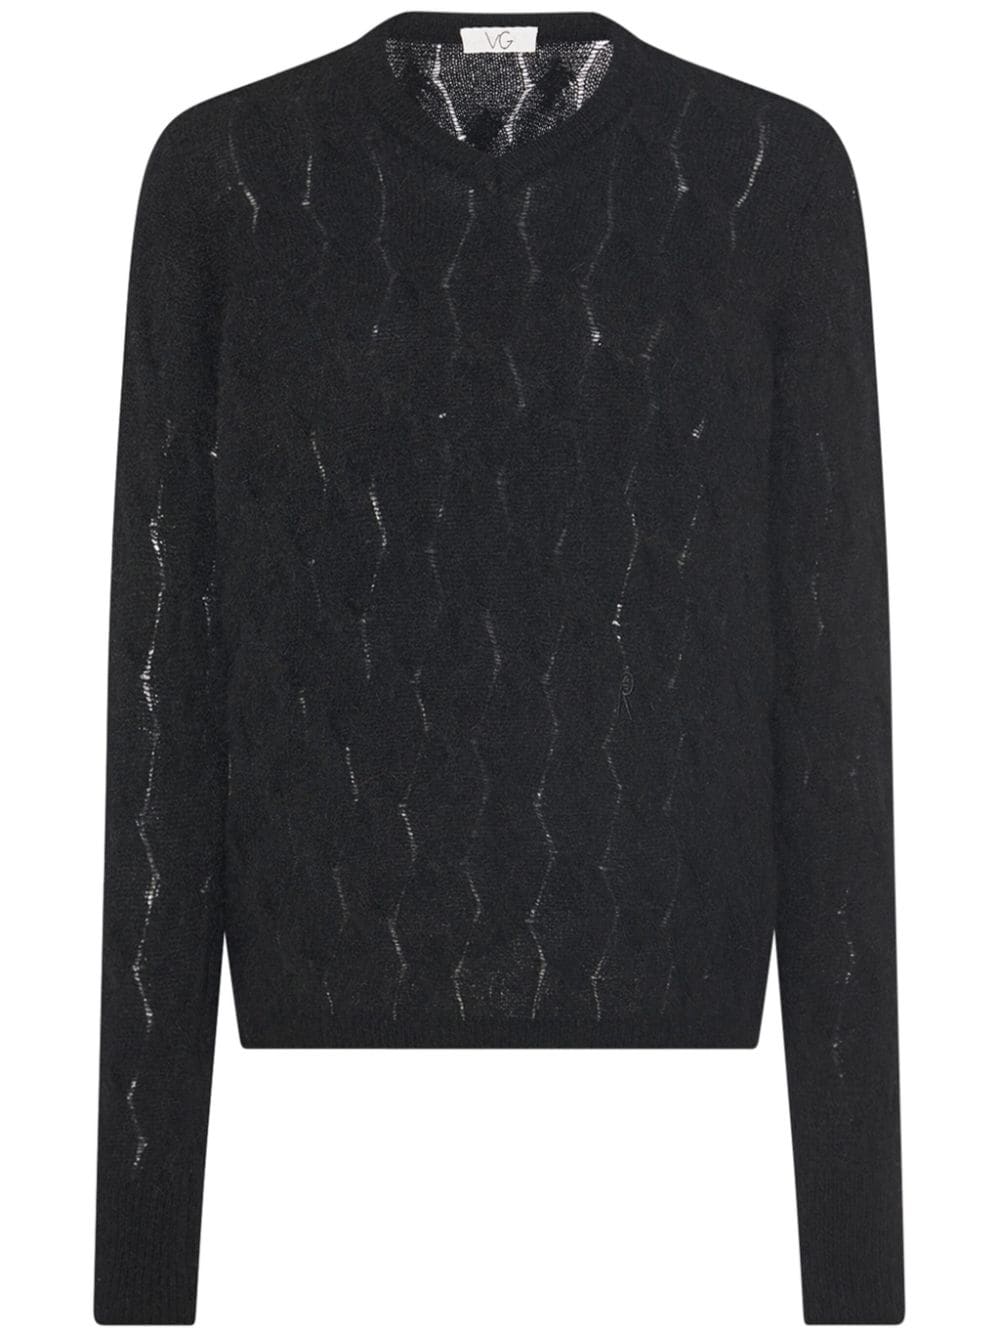 Image 1 of Rosetta Getty x Violet Getty pointelle-knit jumper